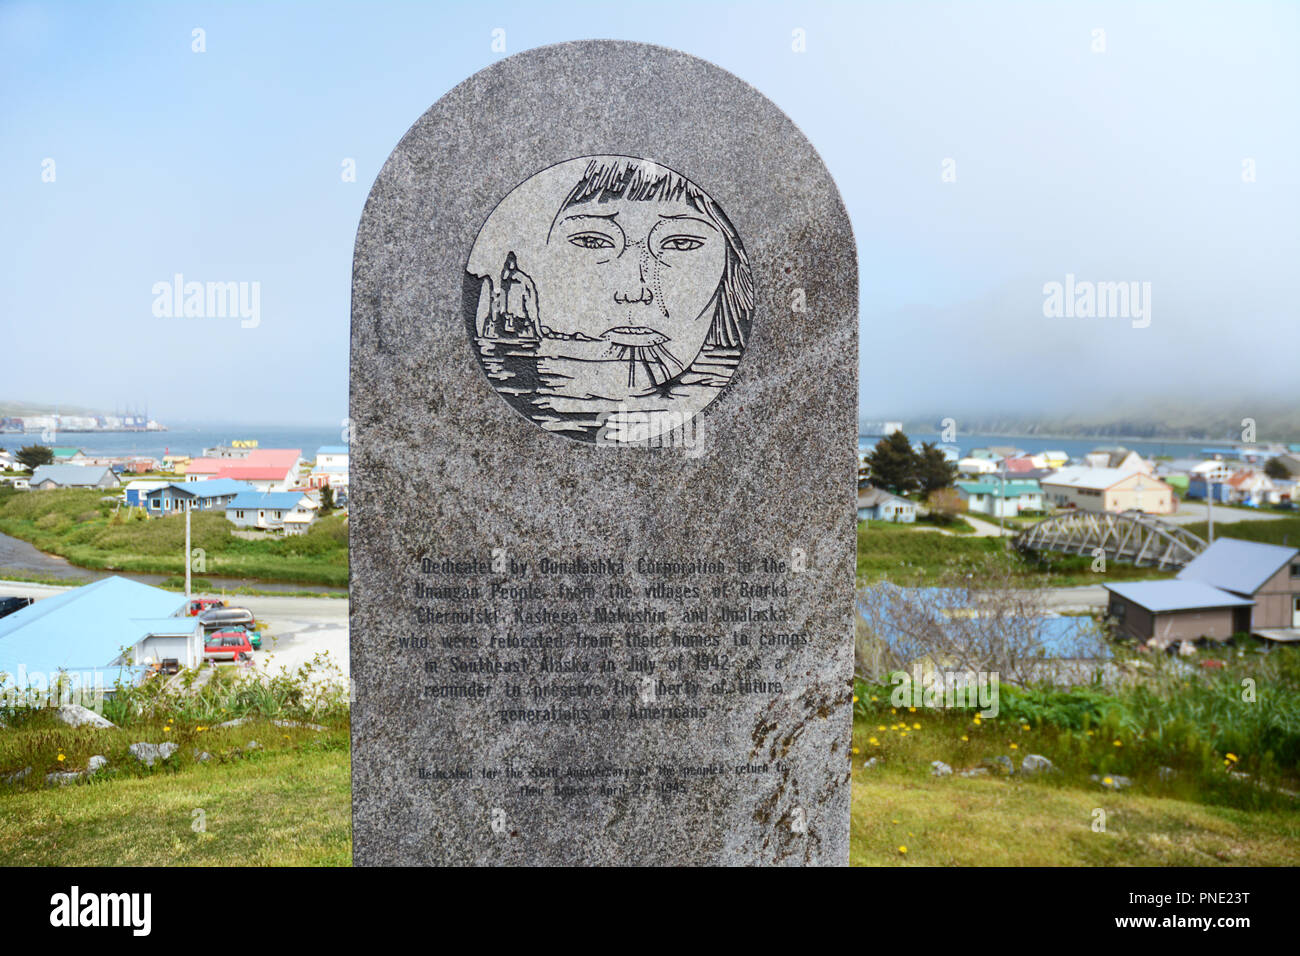 A monument commemorating the forced internment and deaths of Unangan residents of the Aleutian Islands in World War Two, In Unalaska, Alaska, USA. Stock Photo